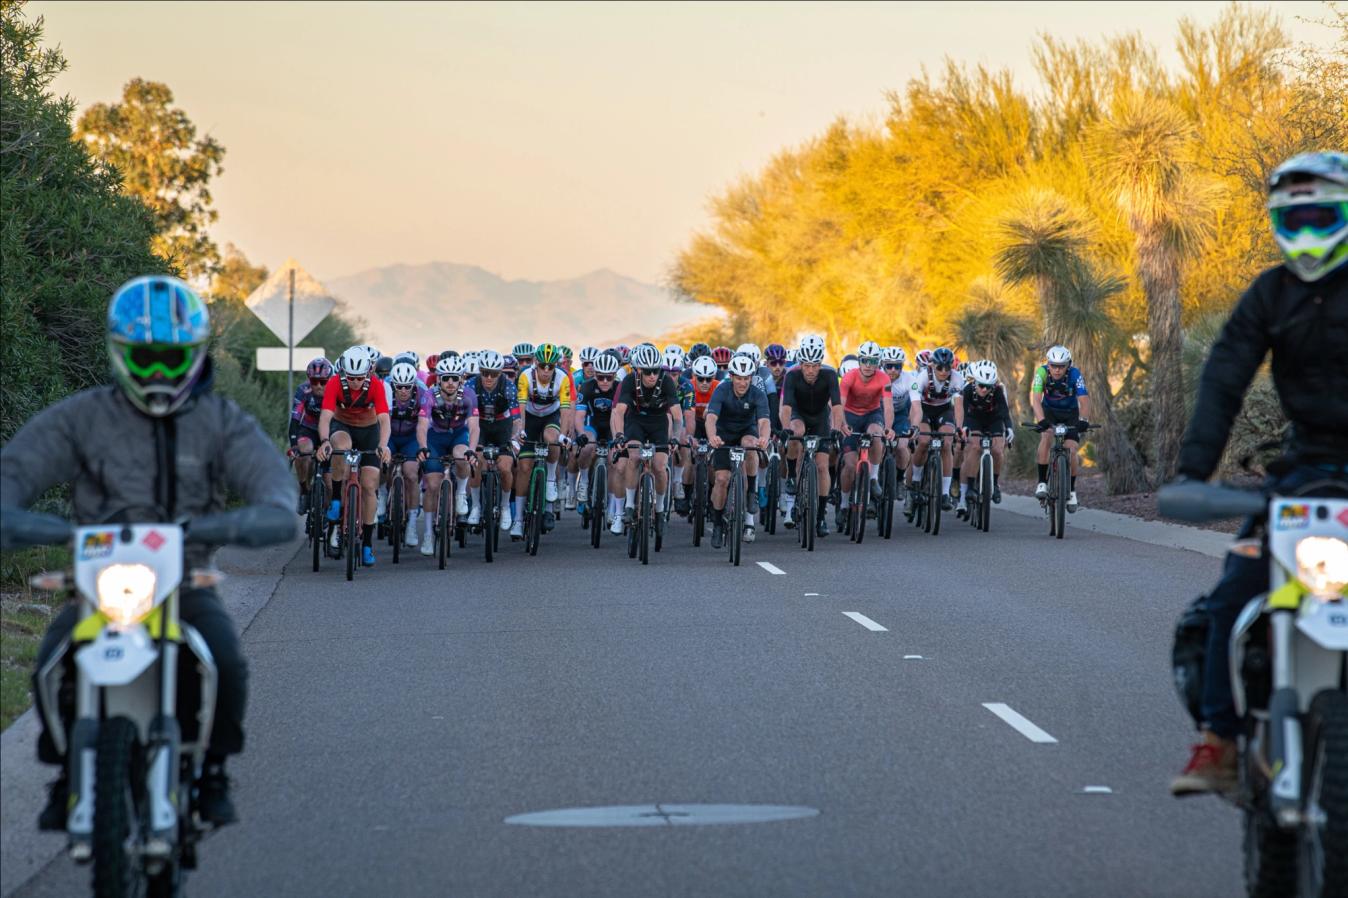 The tightly packed start of the Belgian Waffle Ride Arizona peloton